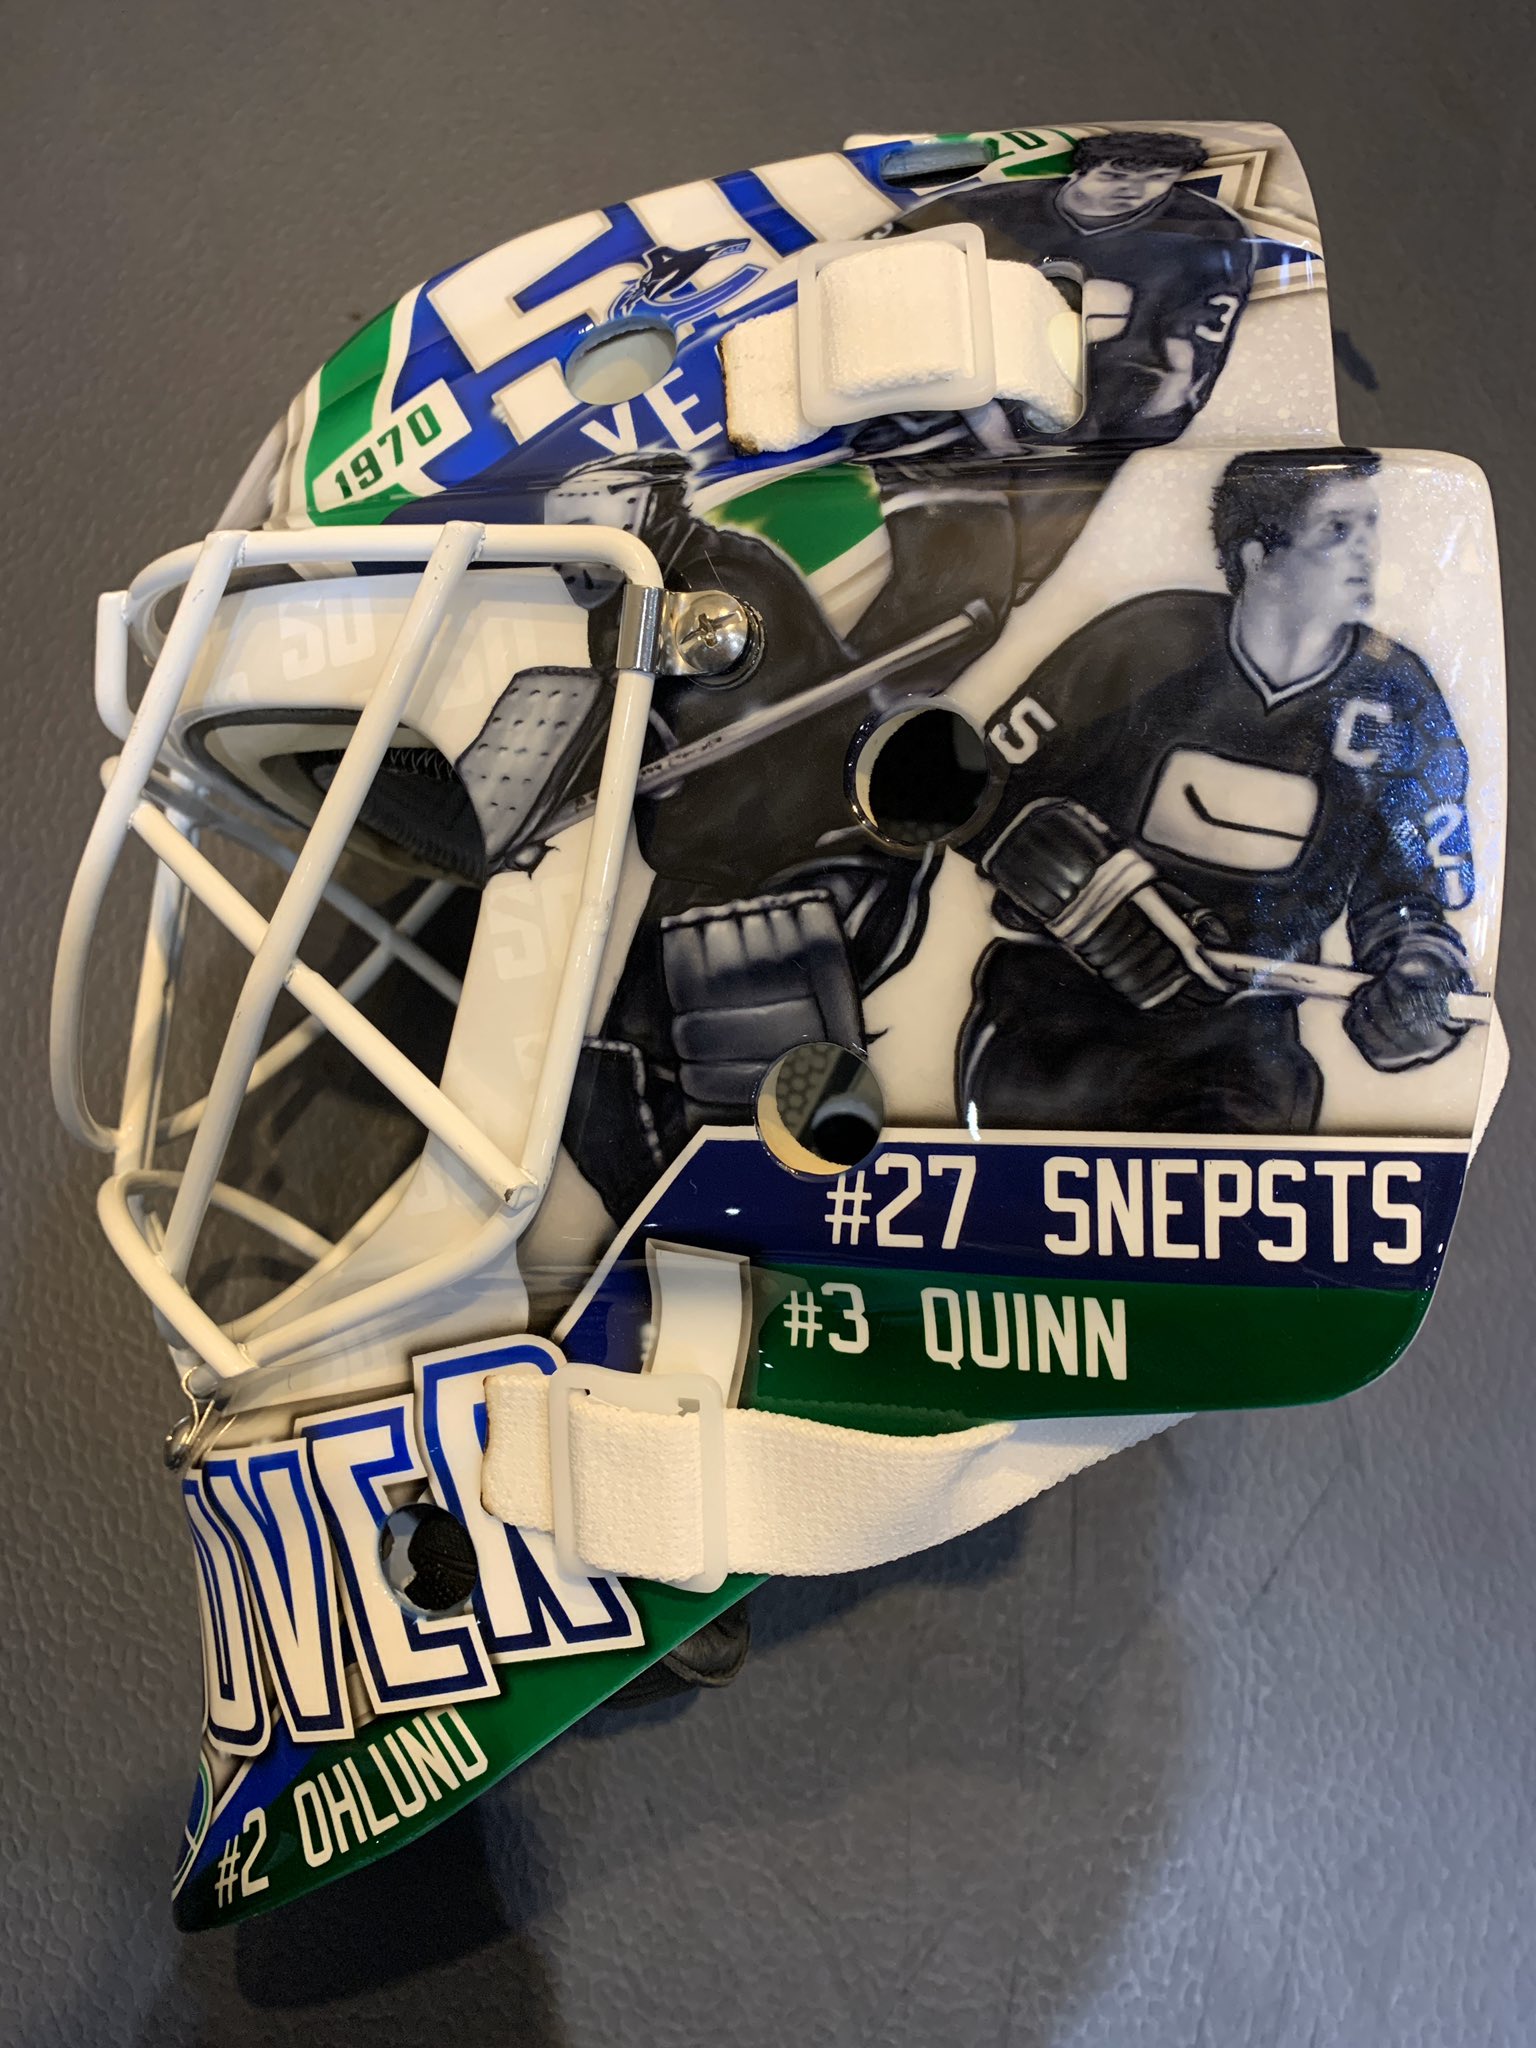 Thatcher Demko's skate jersey gear is a throwback to Kirk McLean